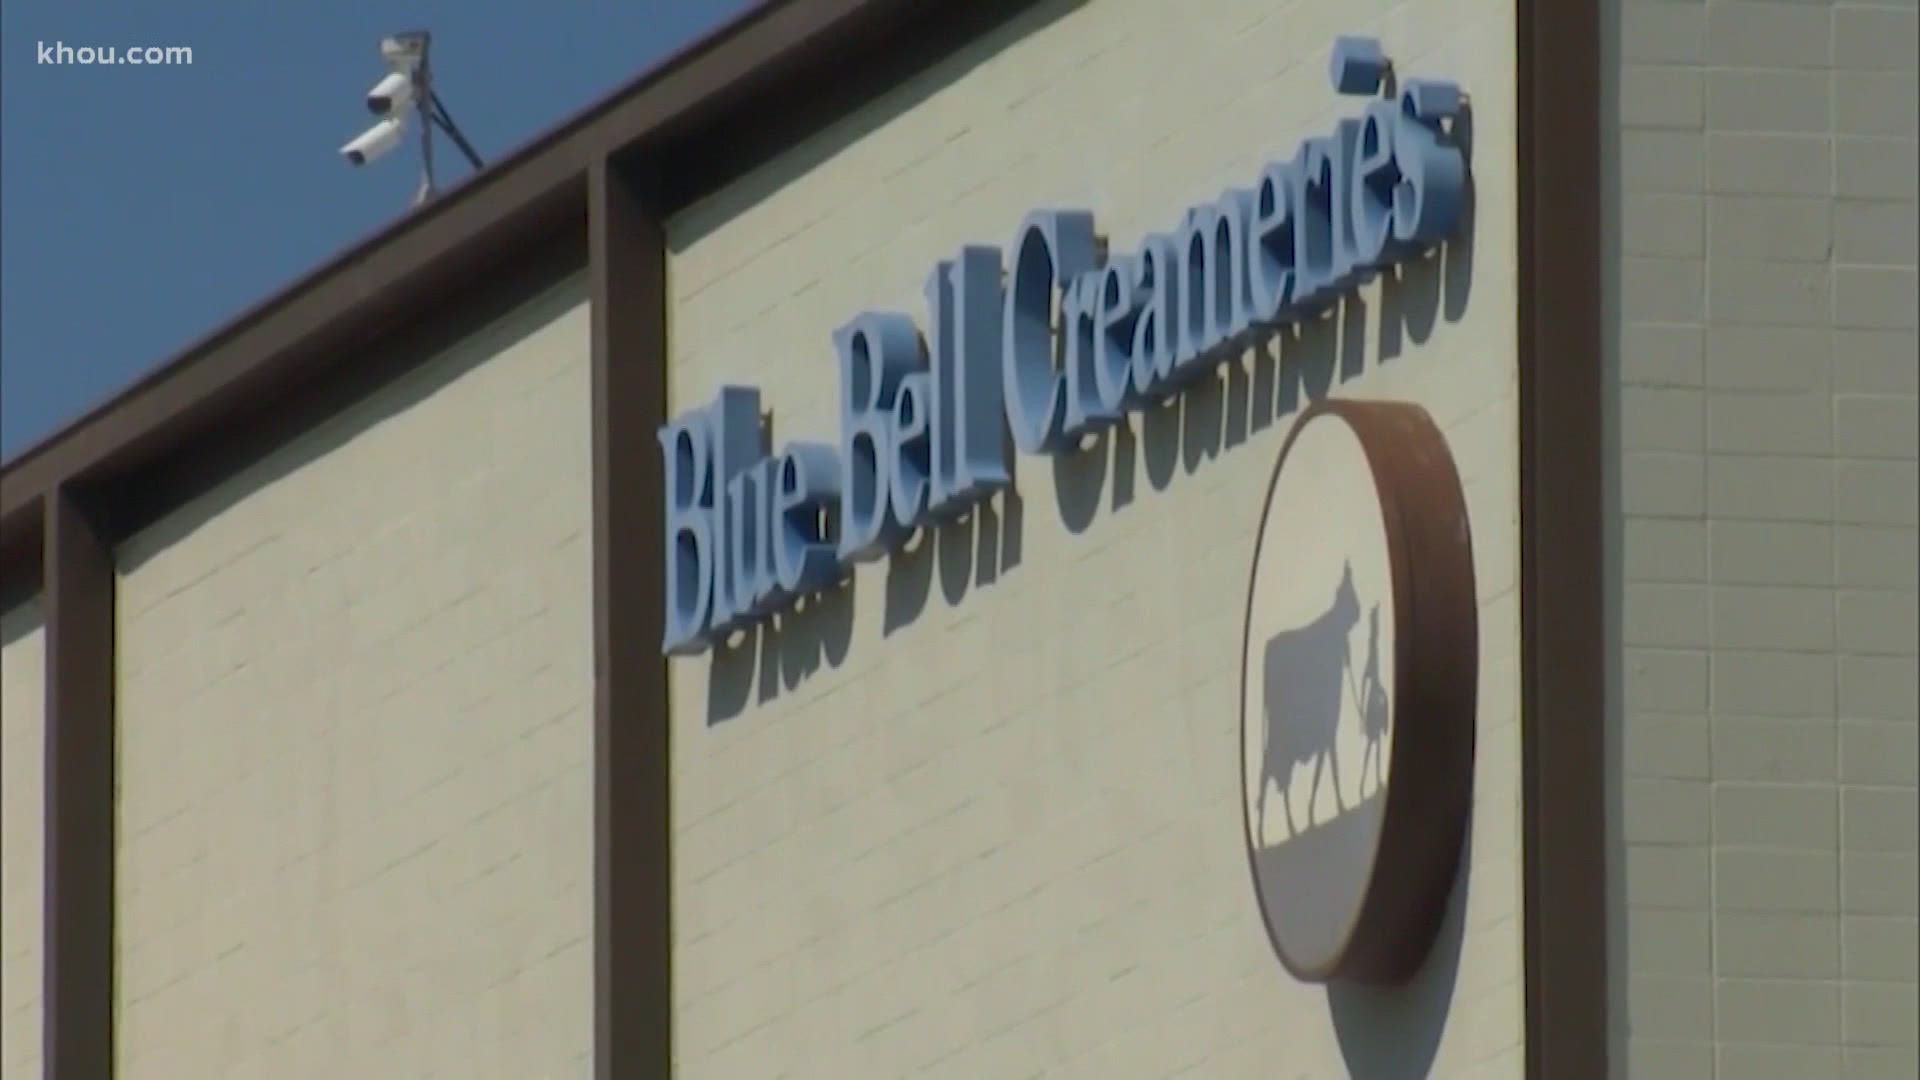 Blue Bell pleaded guilty in May 2020 to two misdemeanor counts of distributing adulterated ice cream products.